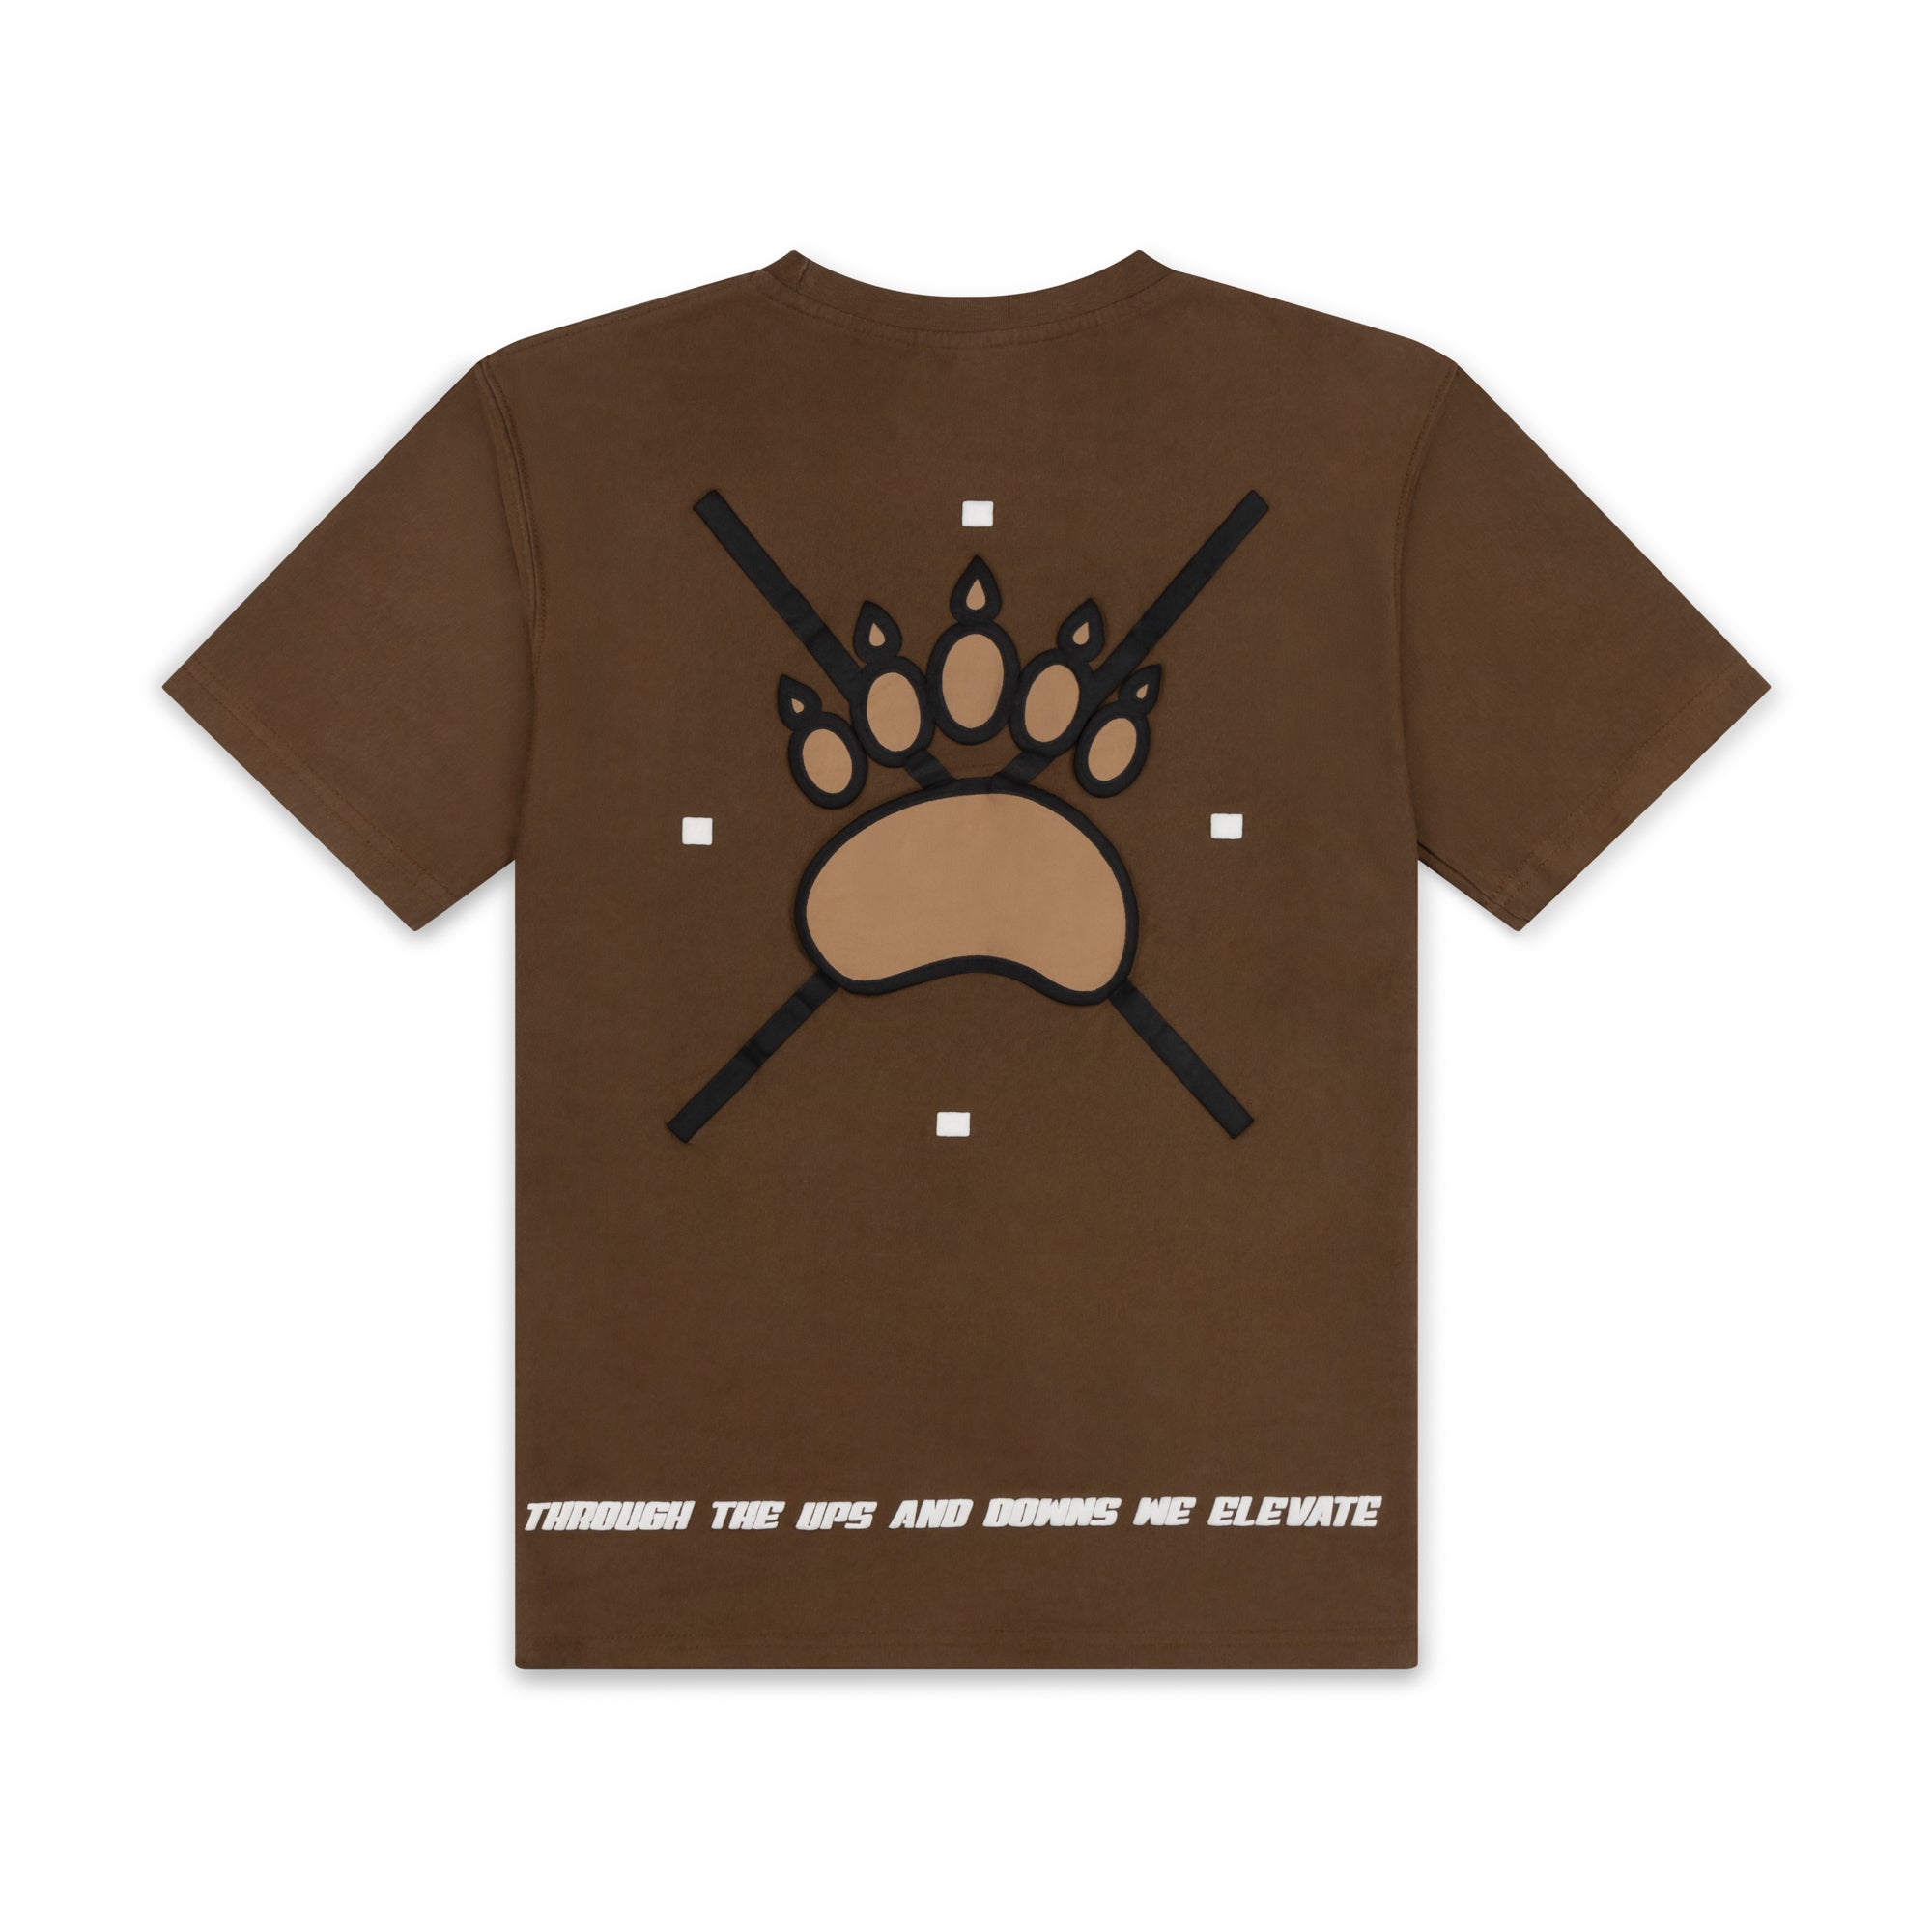 Brown Vintage T-Shirt | Printed Vintage Shirts | The Survival Couture